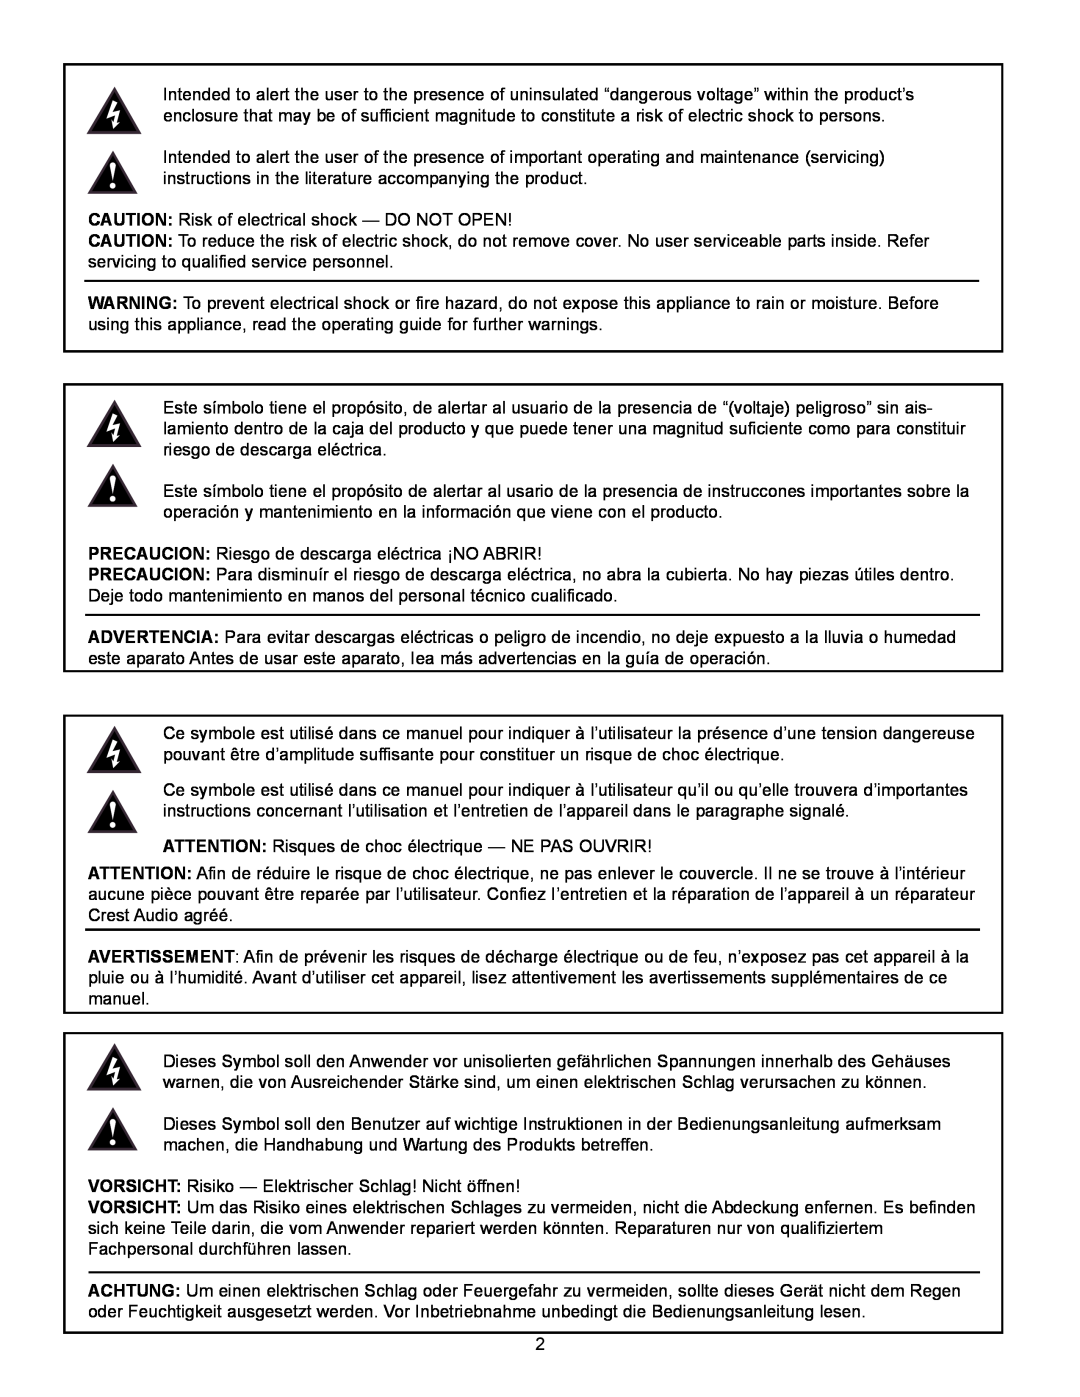 Crest Audio LQ 10P user manual CAUTION Risk of electrical shock - DO NOT OPEN 